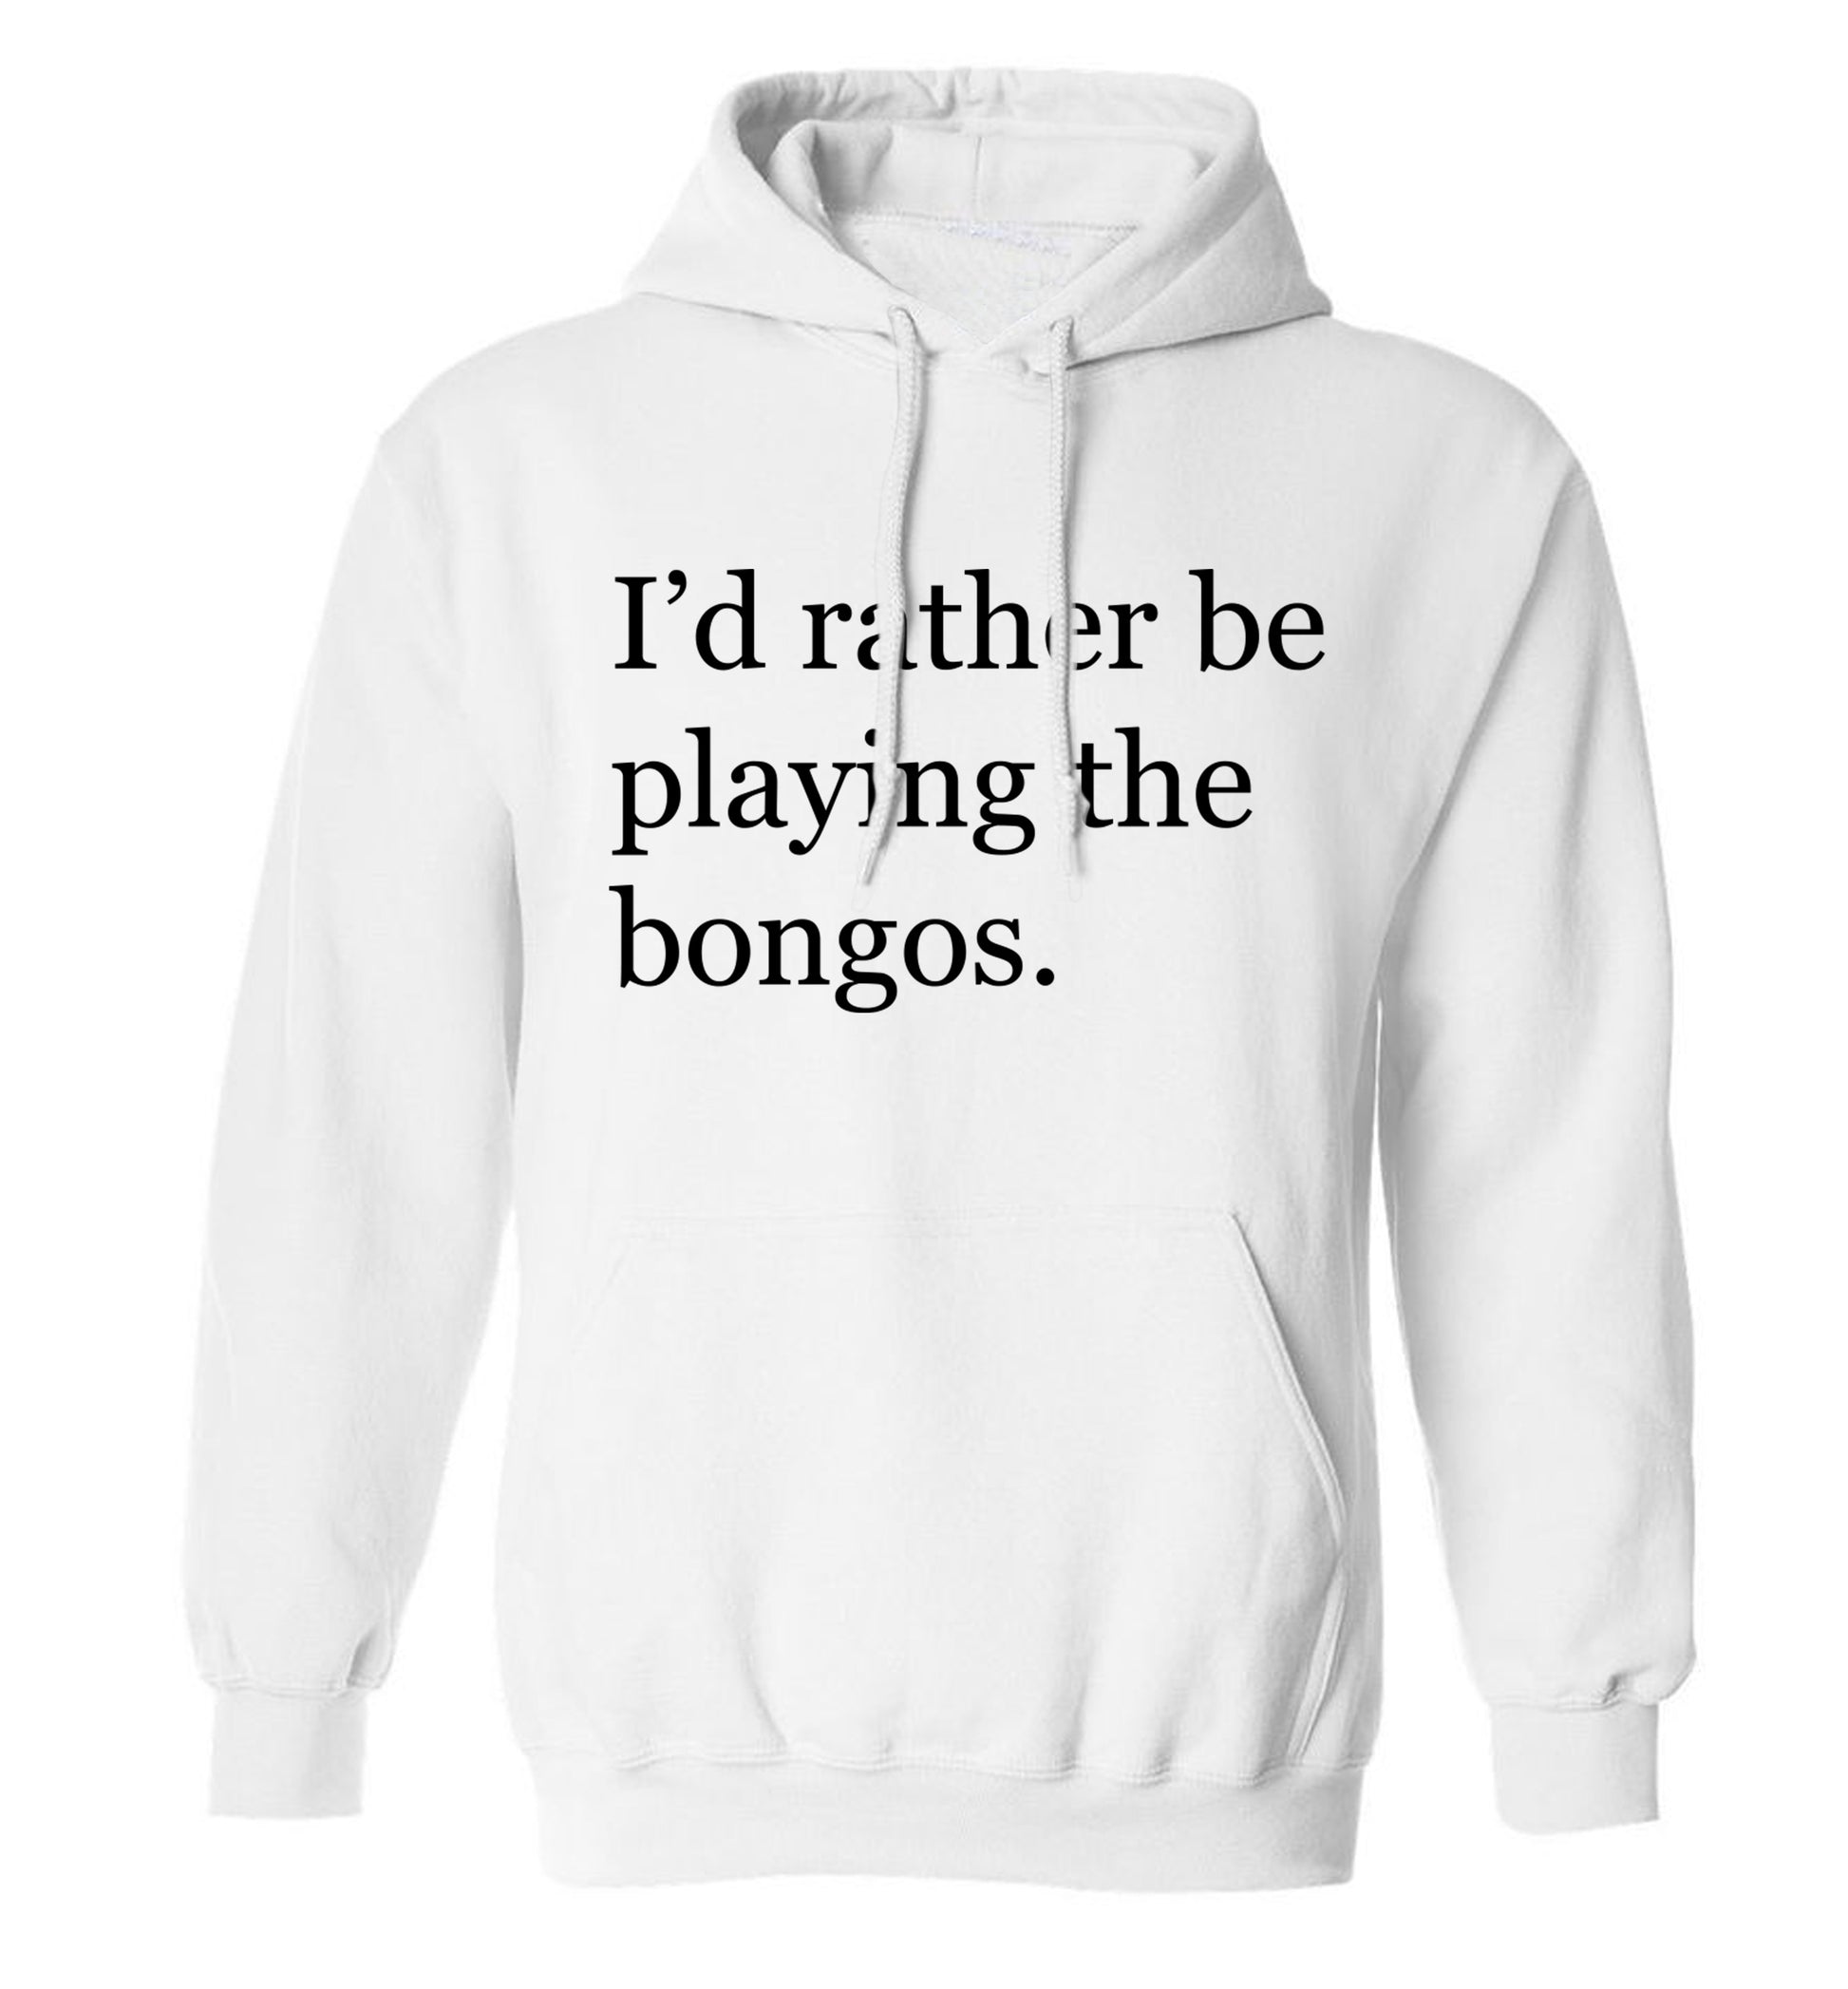 I'd rather be playing the bongos adults unisexwhite hoodie 2XL